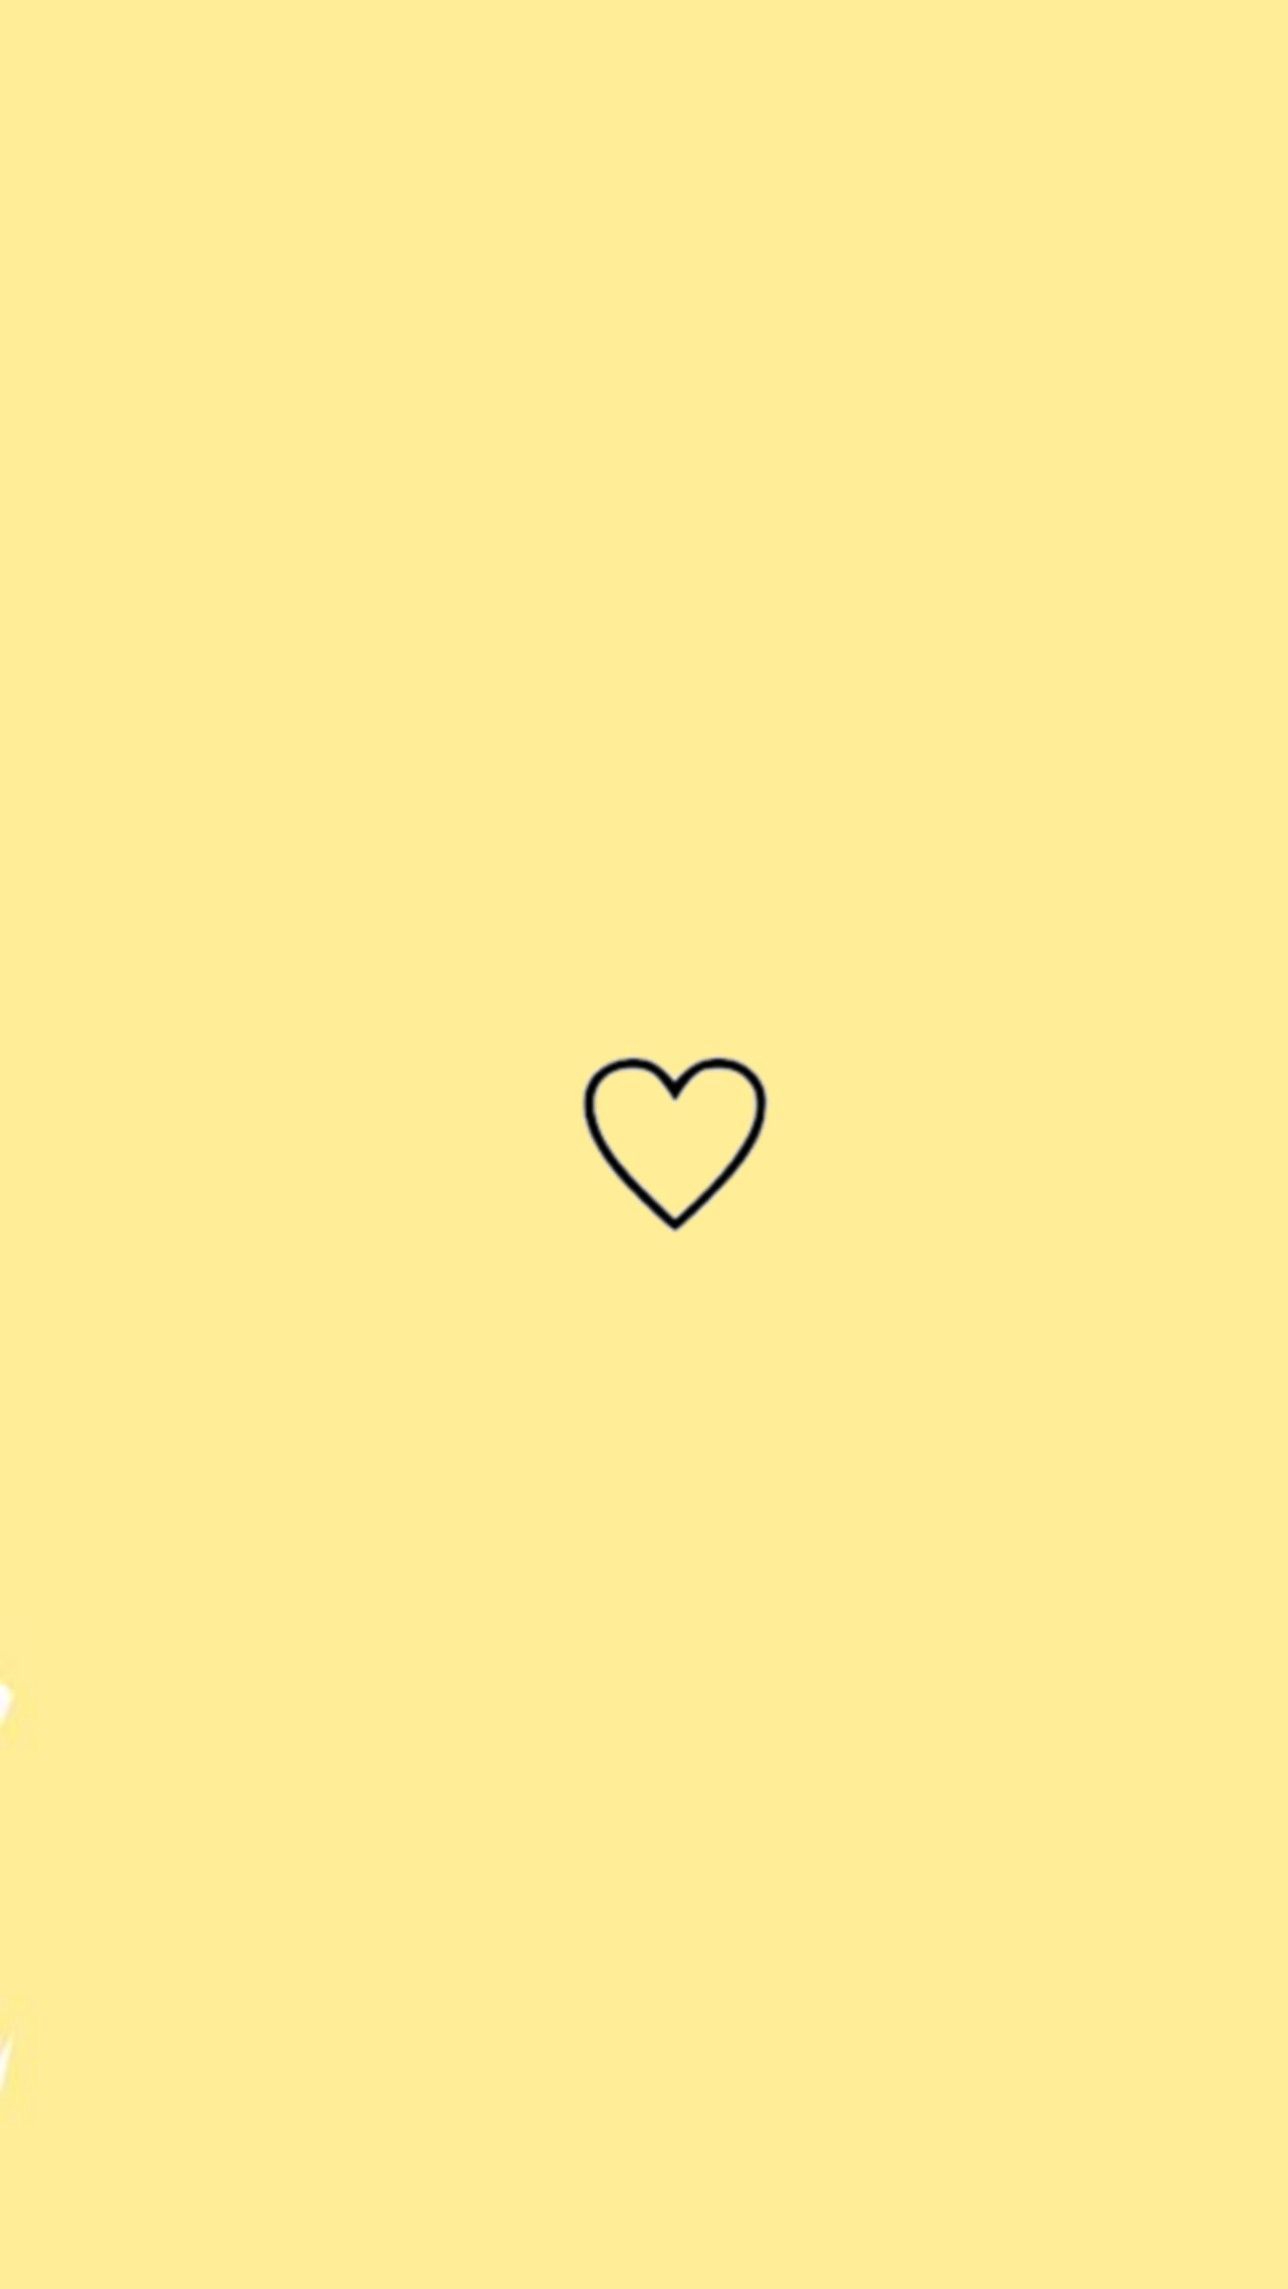 A simple yellow background with a black heart in the middle - Yellow iphone